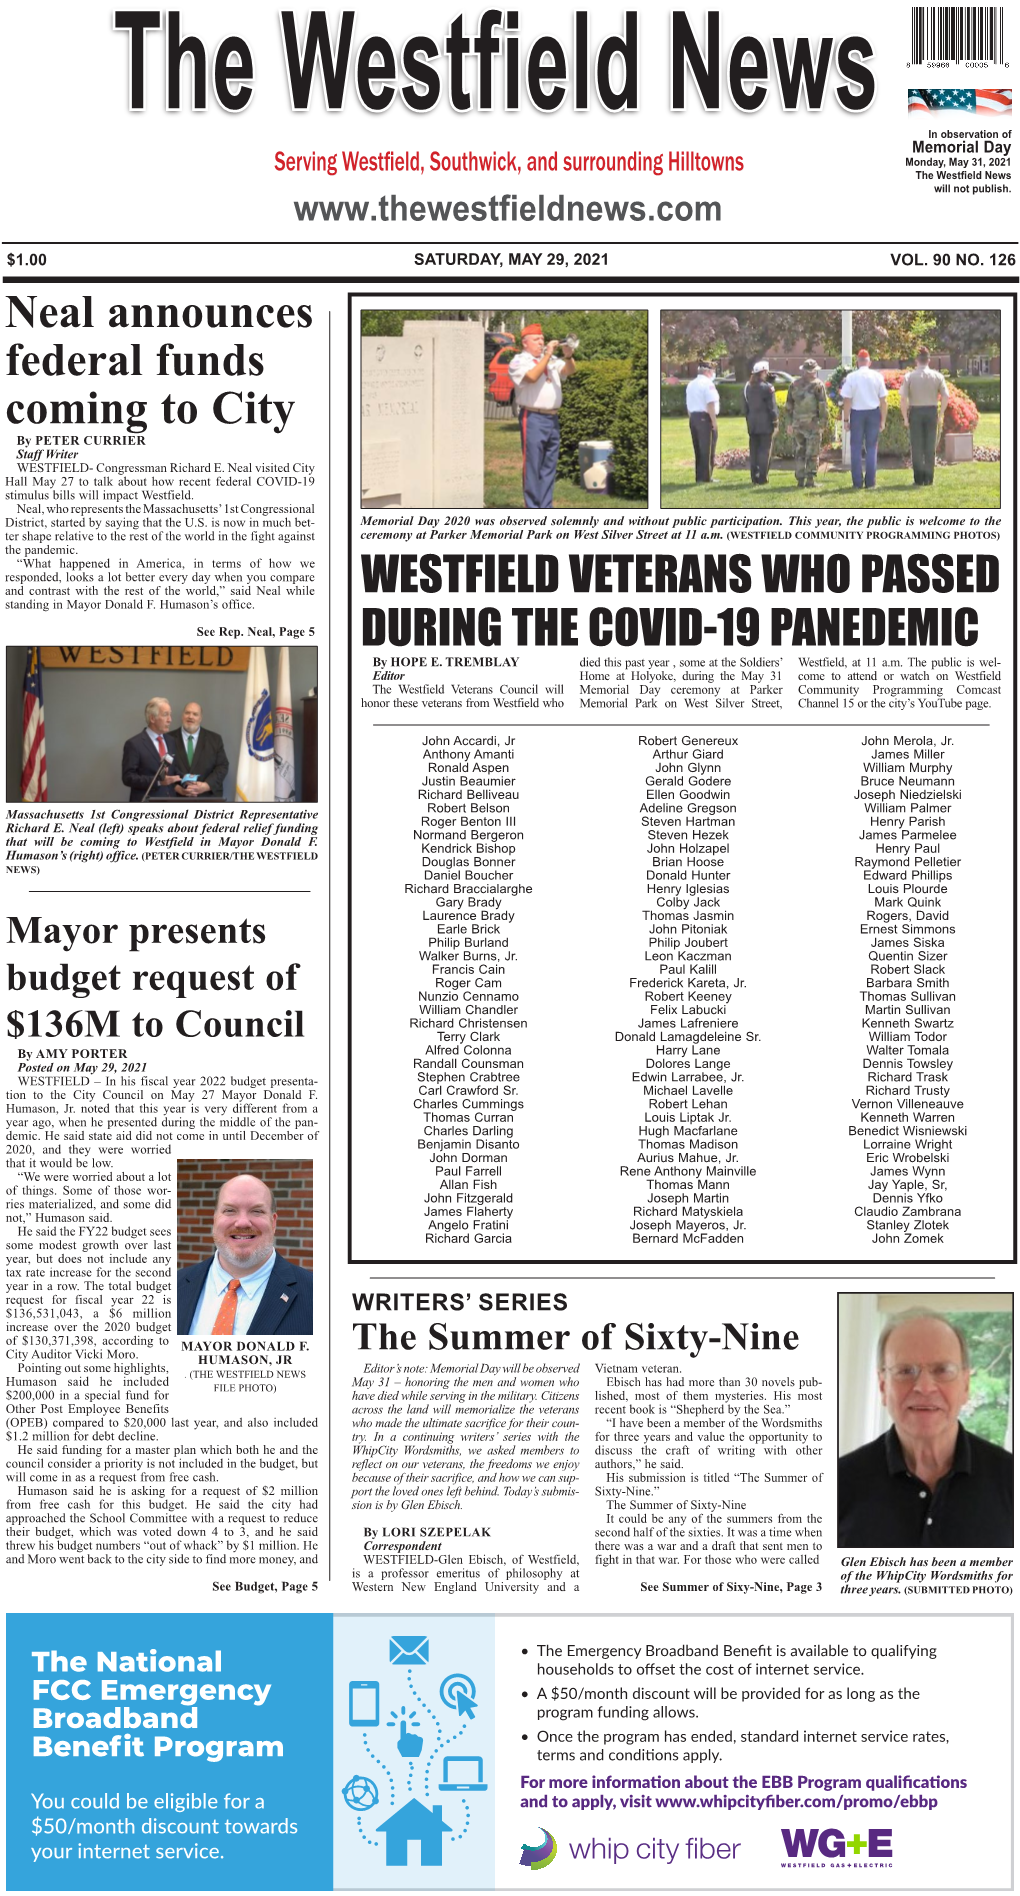 Westfield Veterans Who Passed During the Covid-19